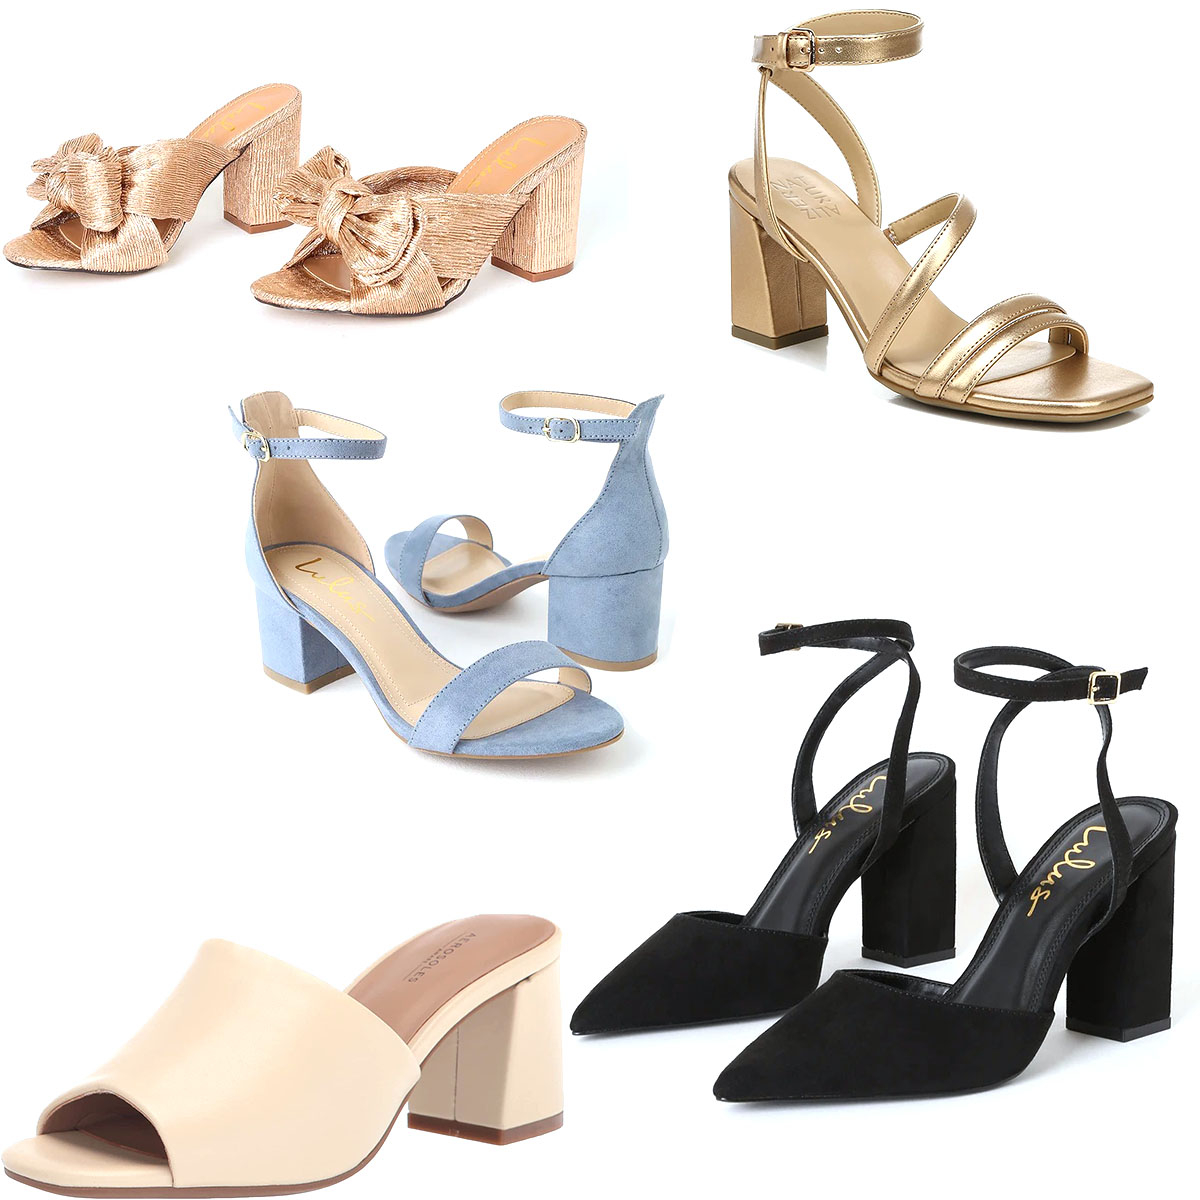 15 Comfortable & Stylish Spring Wedding Guest Heels for Under $50